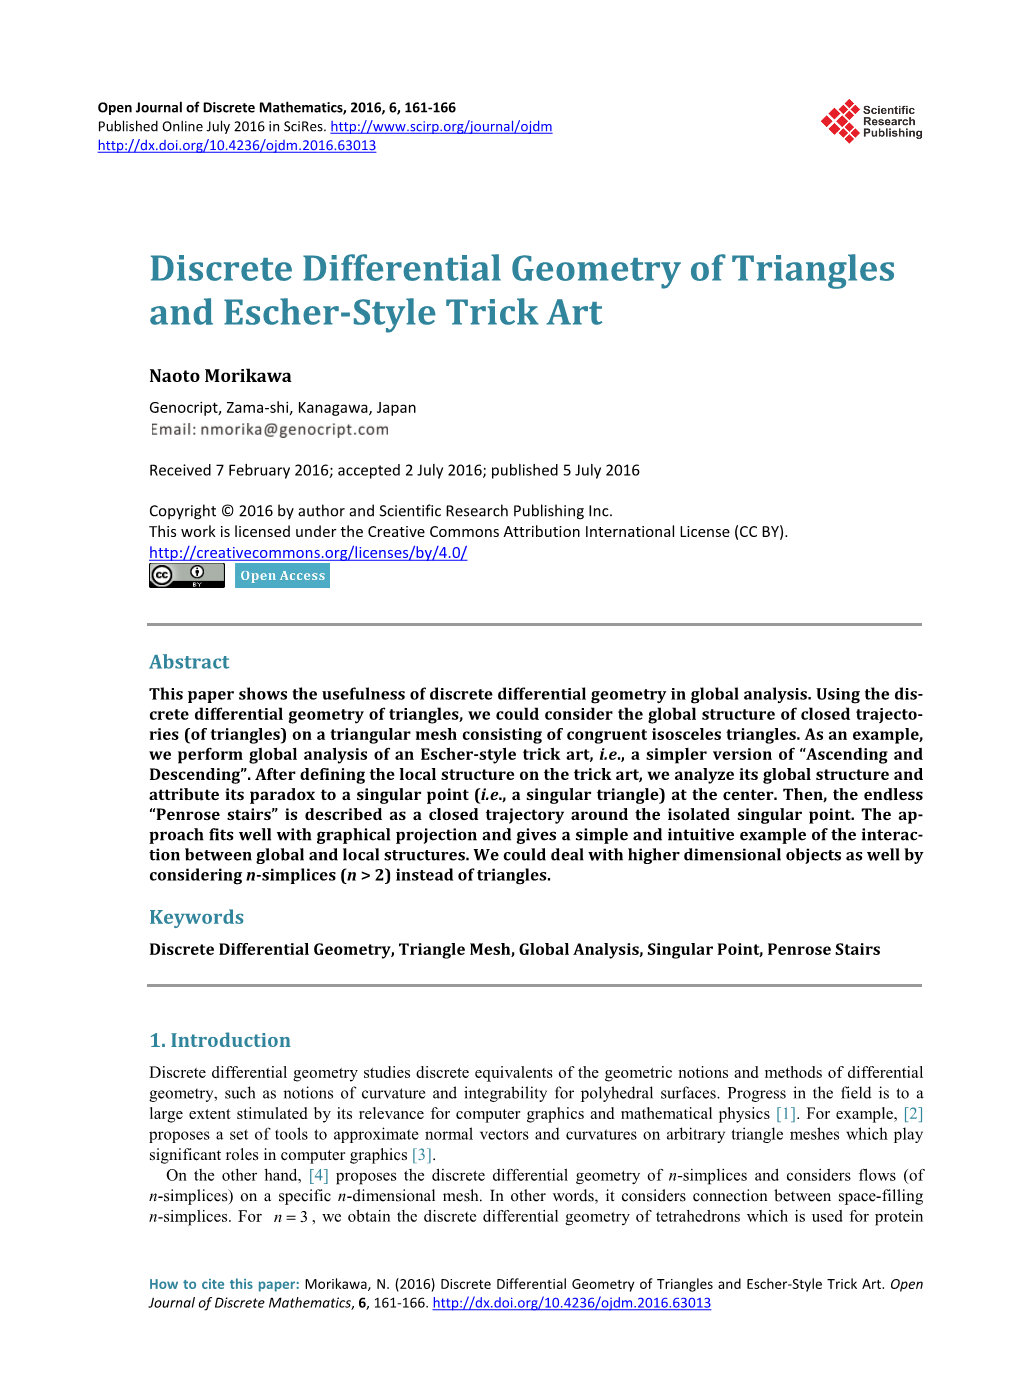 Discrete Differential Geometry of Triangles and Escher-Style Trick Art